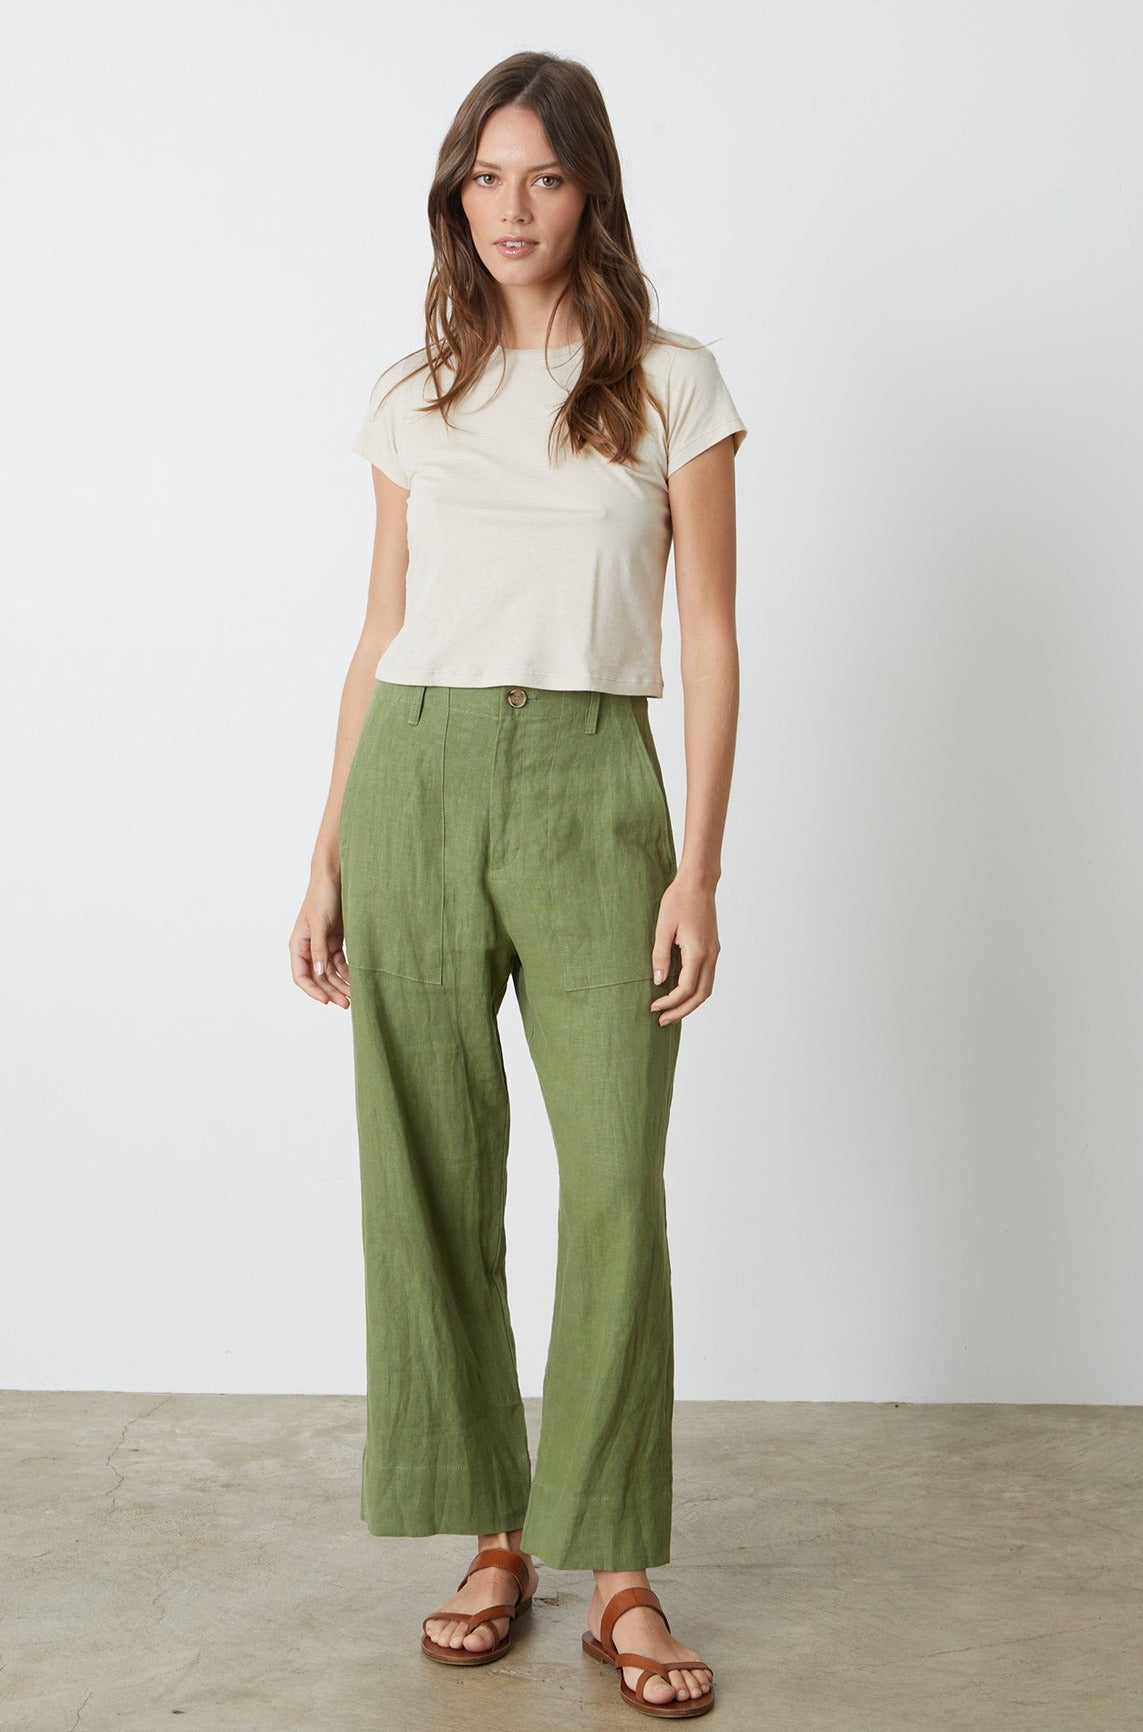 Nina Tee in bisque with Dru pant in basil full length front-26296061132993